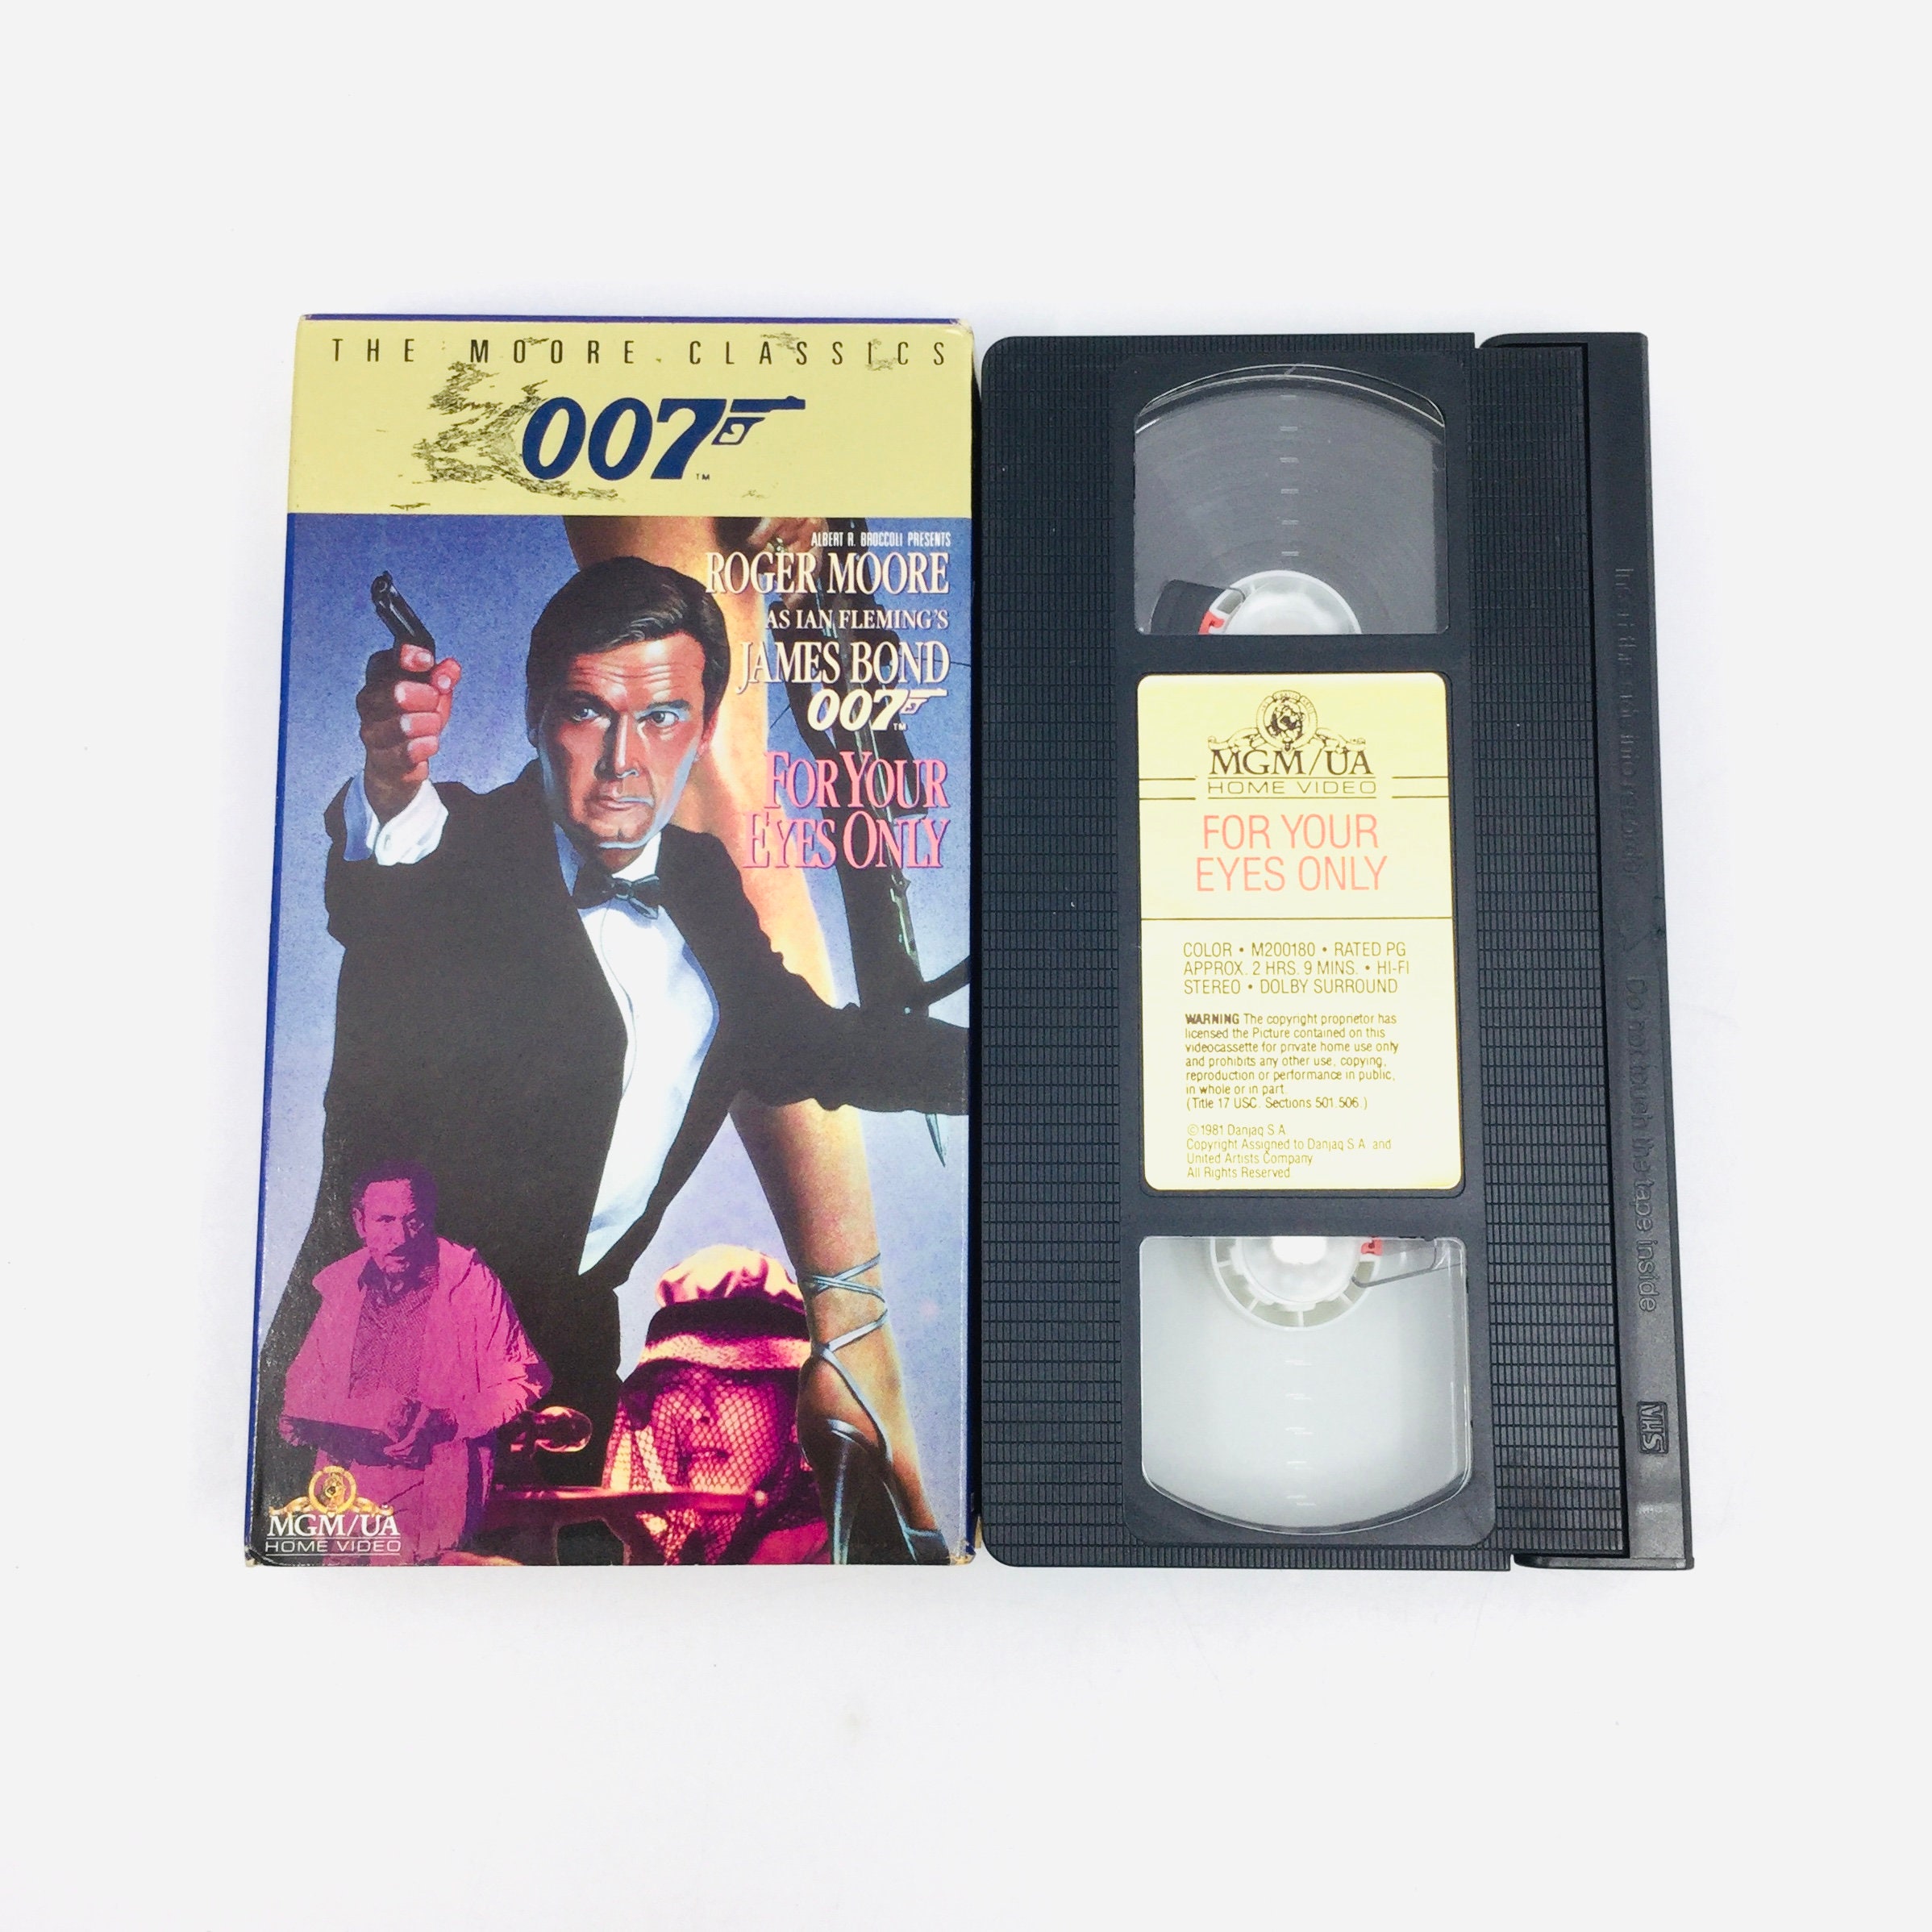 James Bond For Your Eyes Only VHS 007 The Roger Moore Classics | Etsy